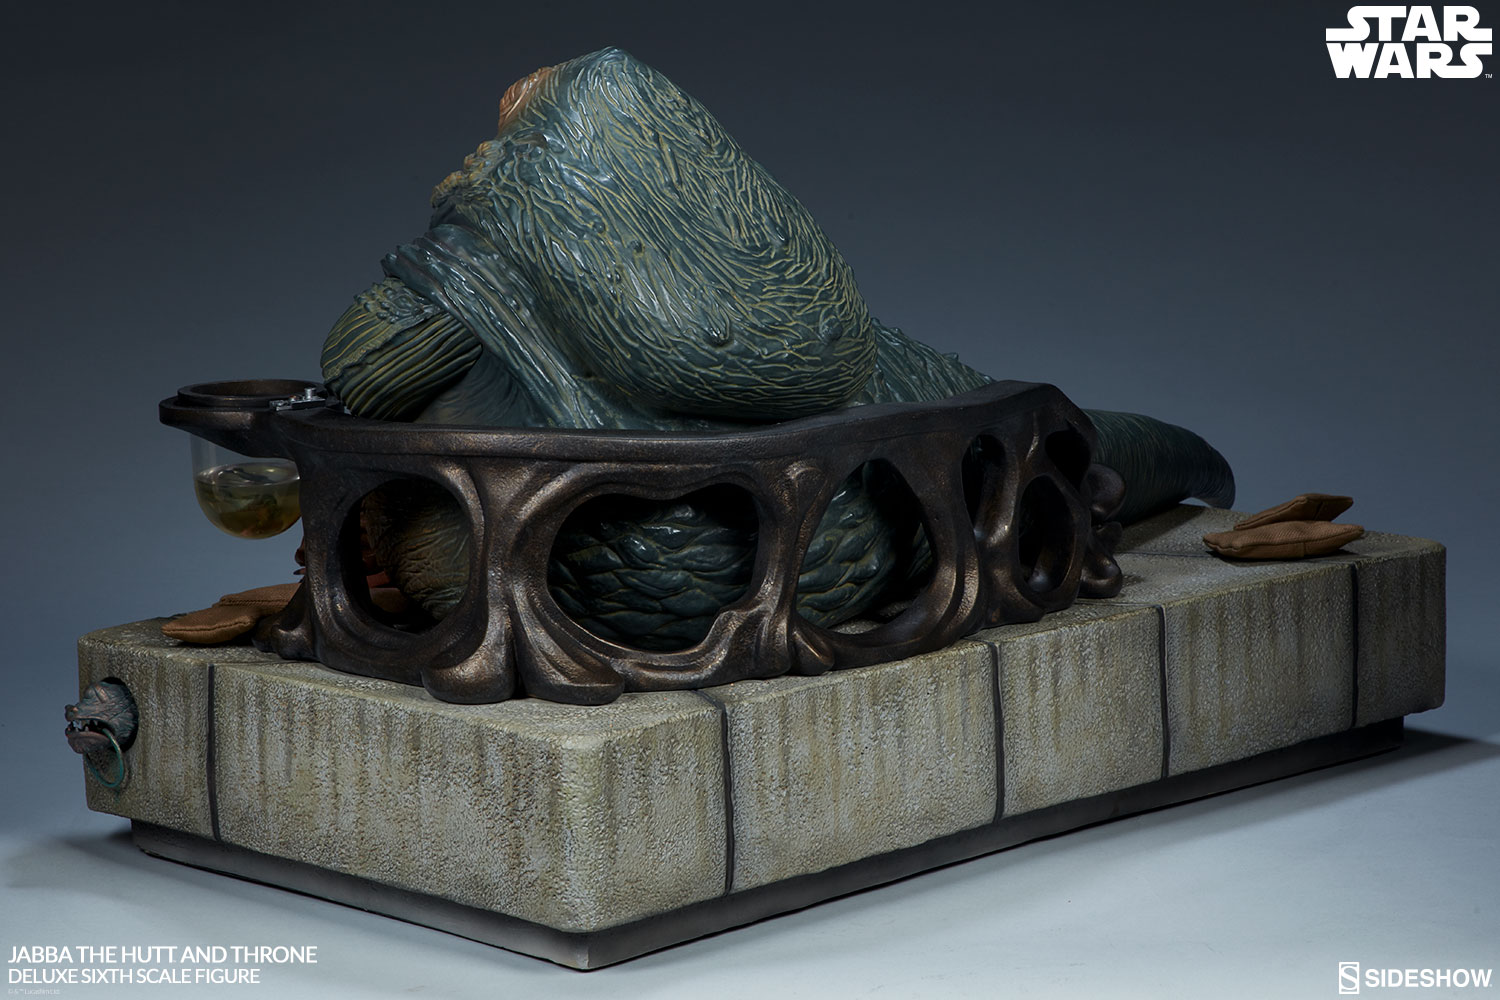 star-wars-jabba-the-hutt-and-throne-deluxe-sixth-scale-figure-sideshow-100410-13.jpg